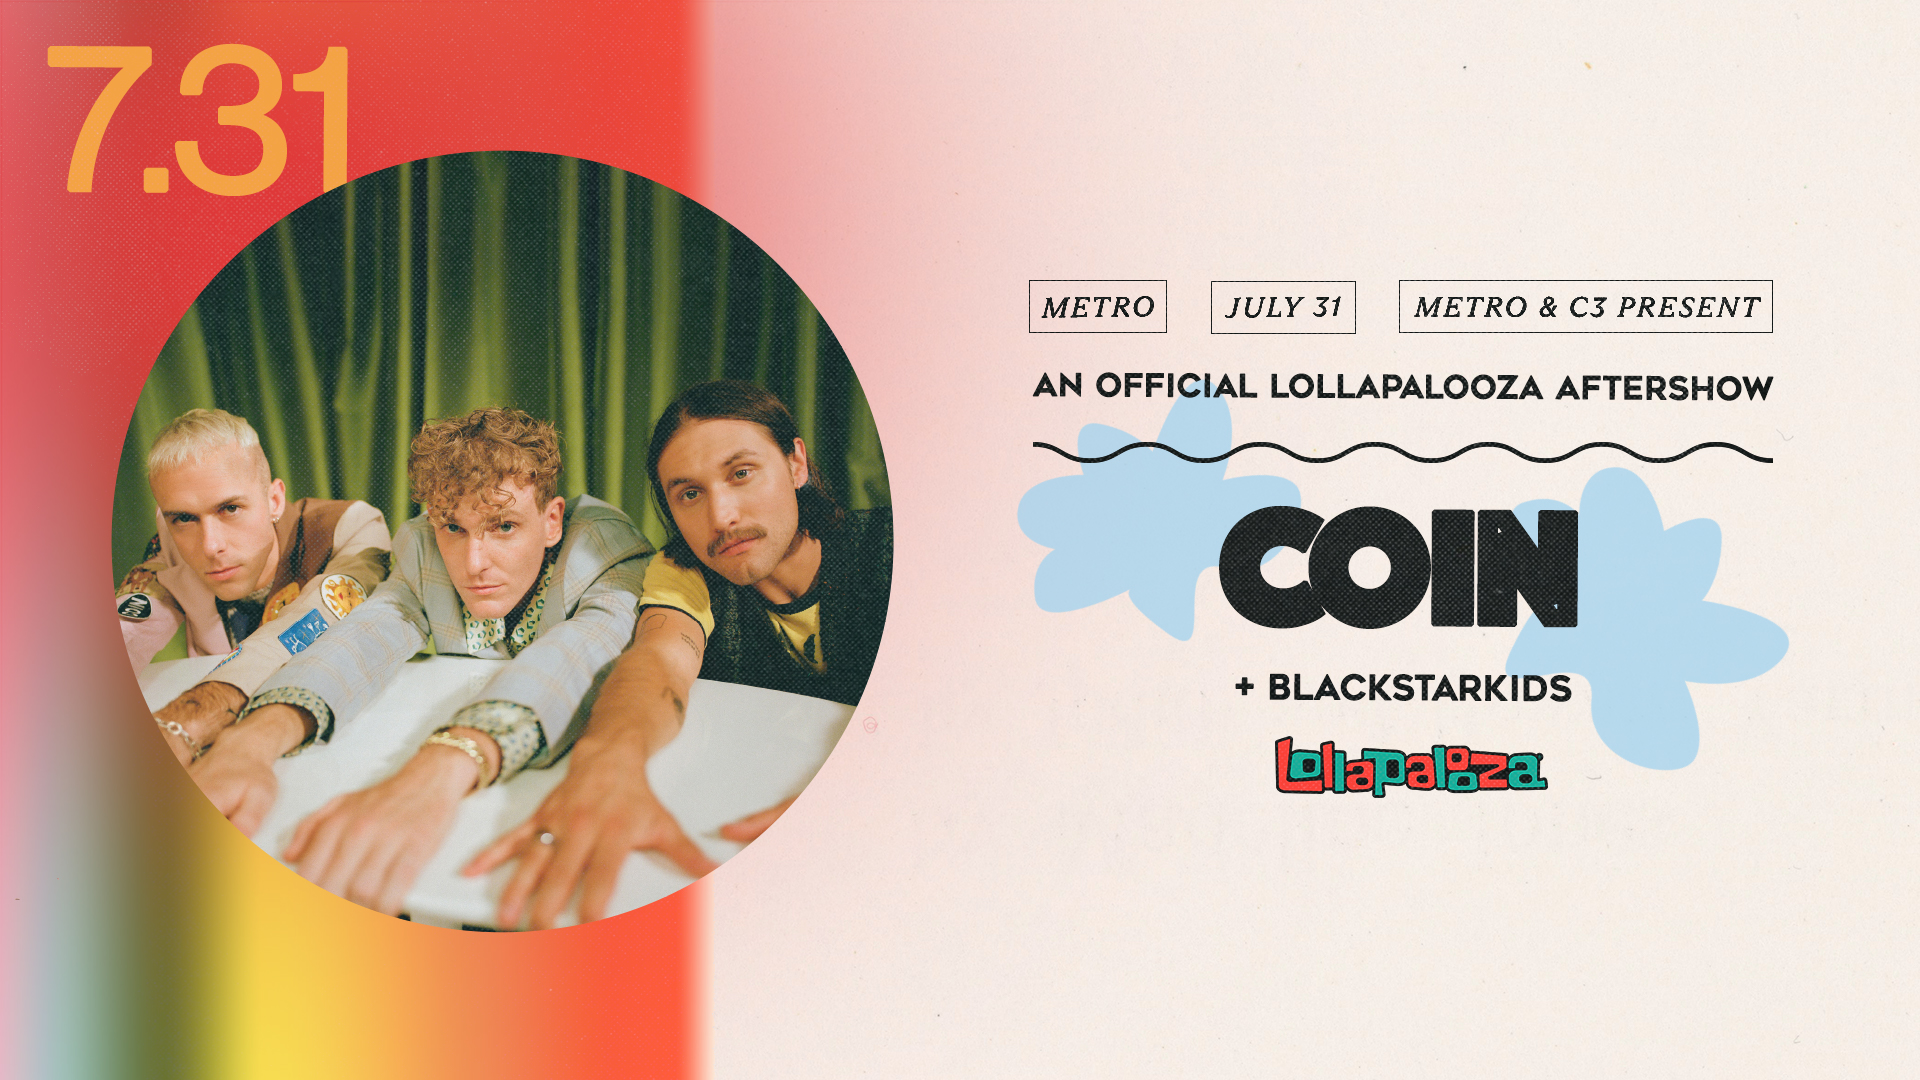 COIN in CHICAGO event information